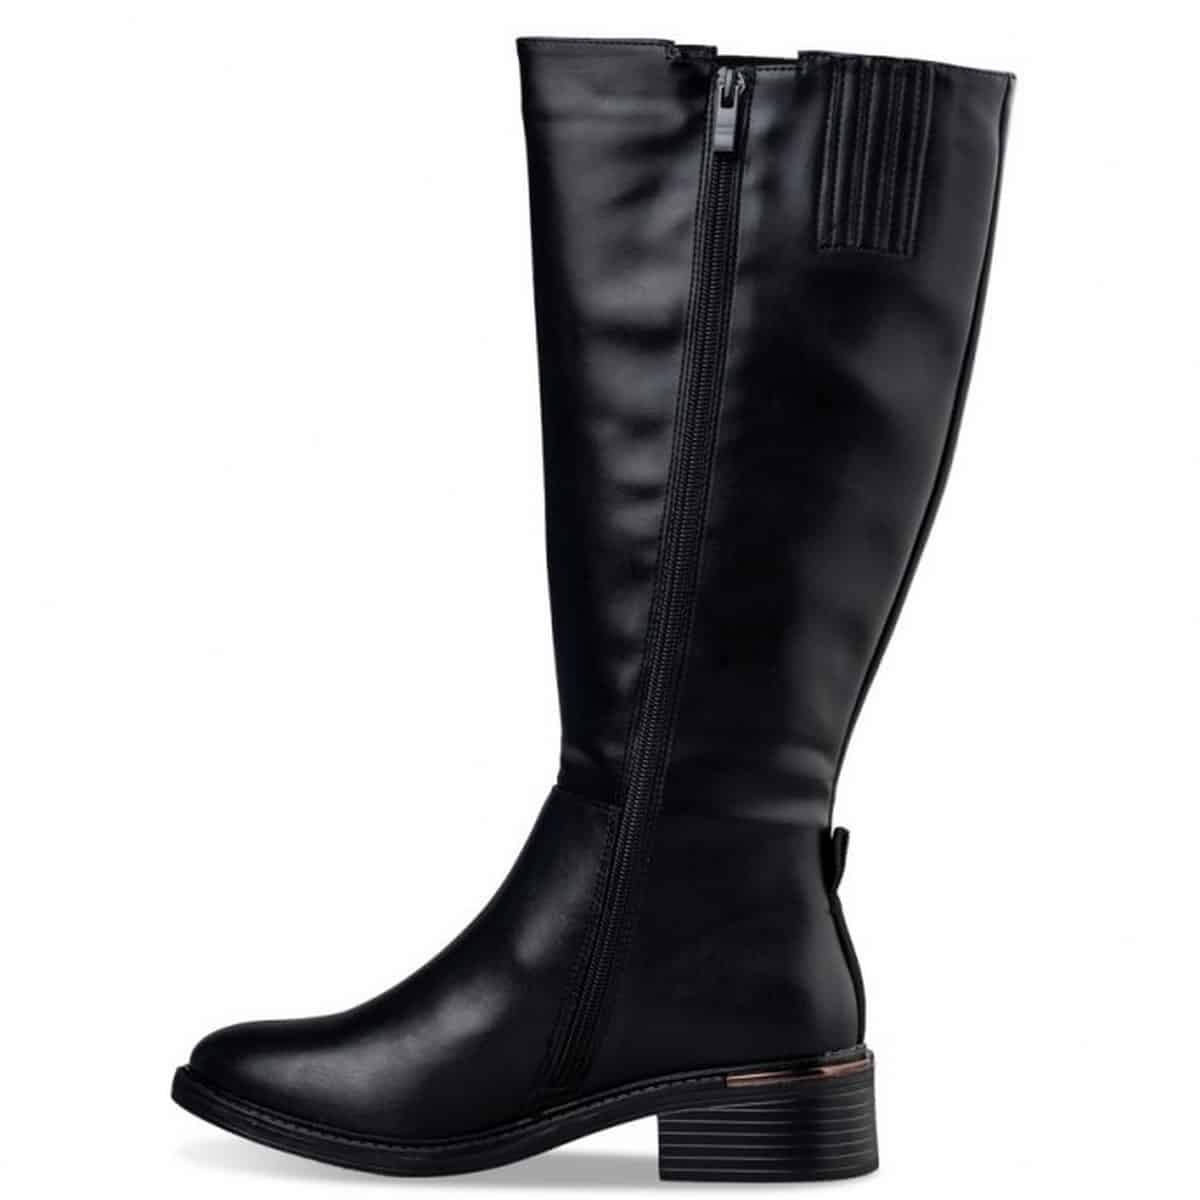 ECO LEATHER RIDING KNEE-HIGH BOOTS V57-18386-34 ENVIE SHOES BLACK